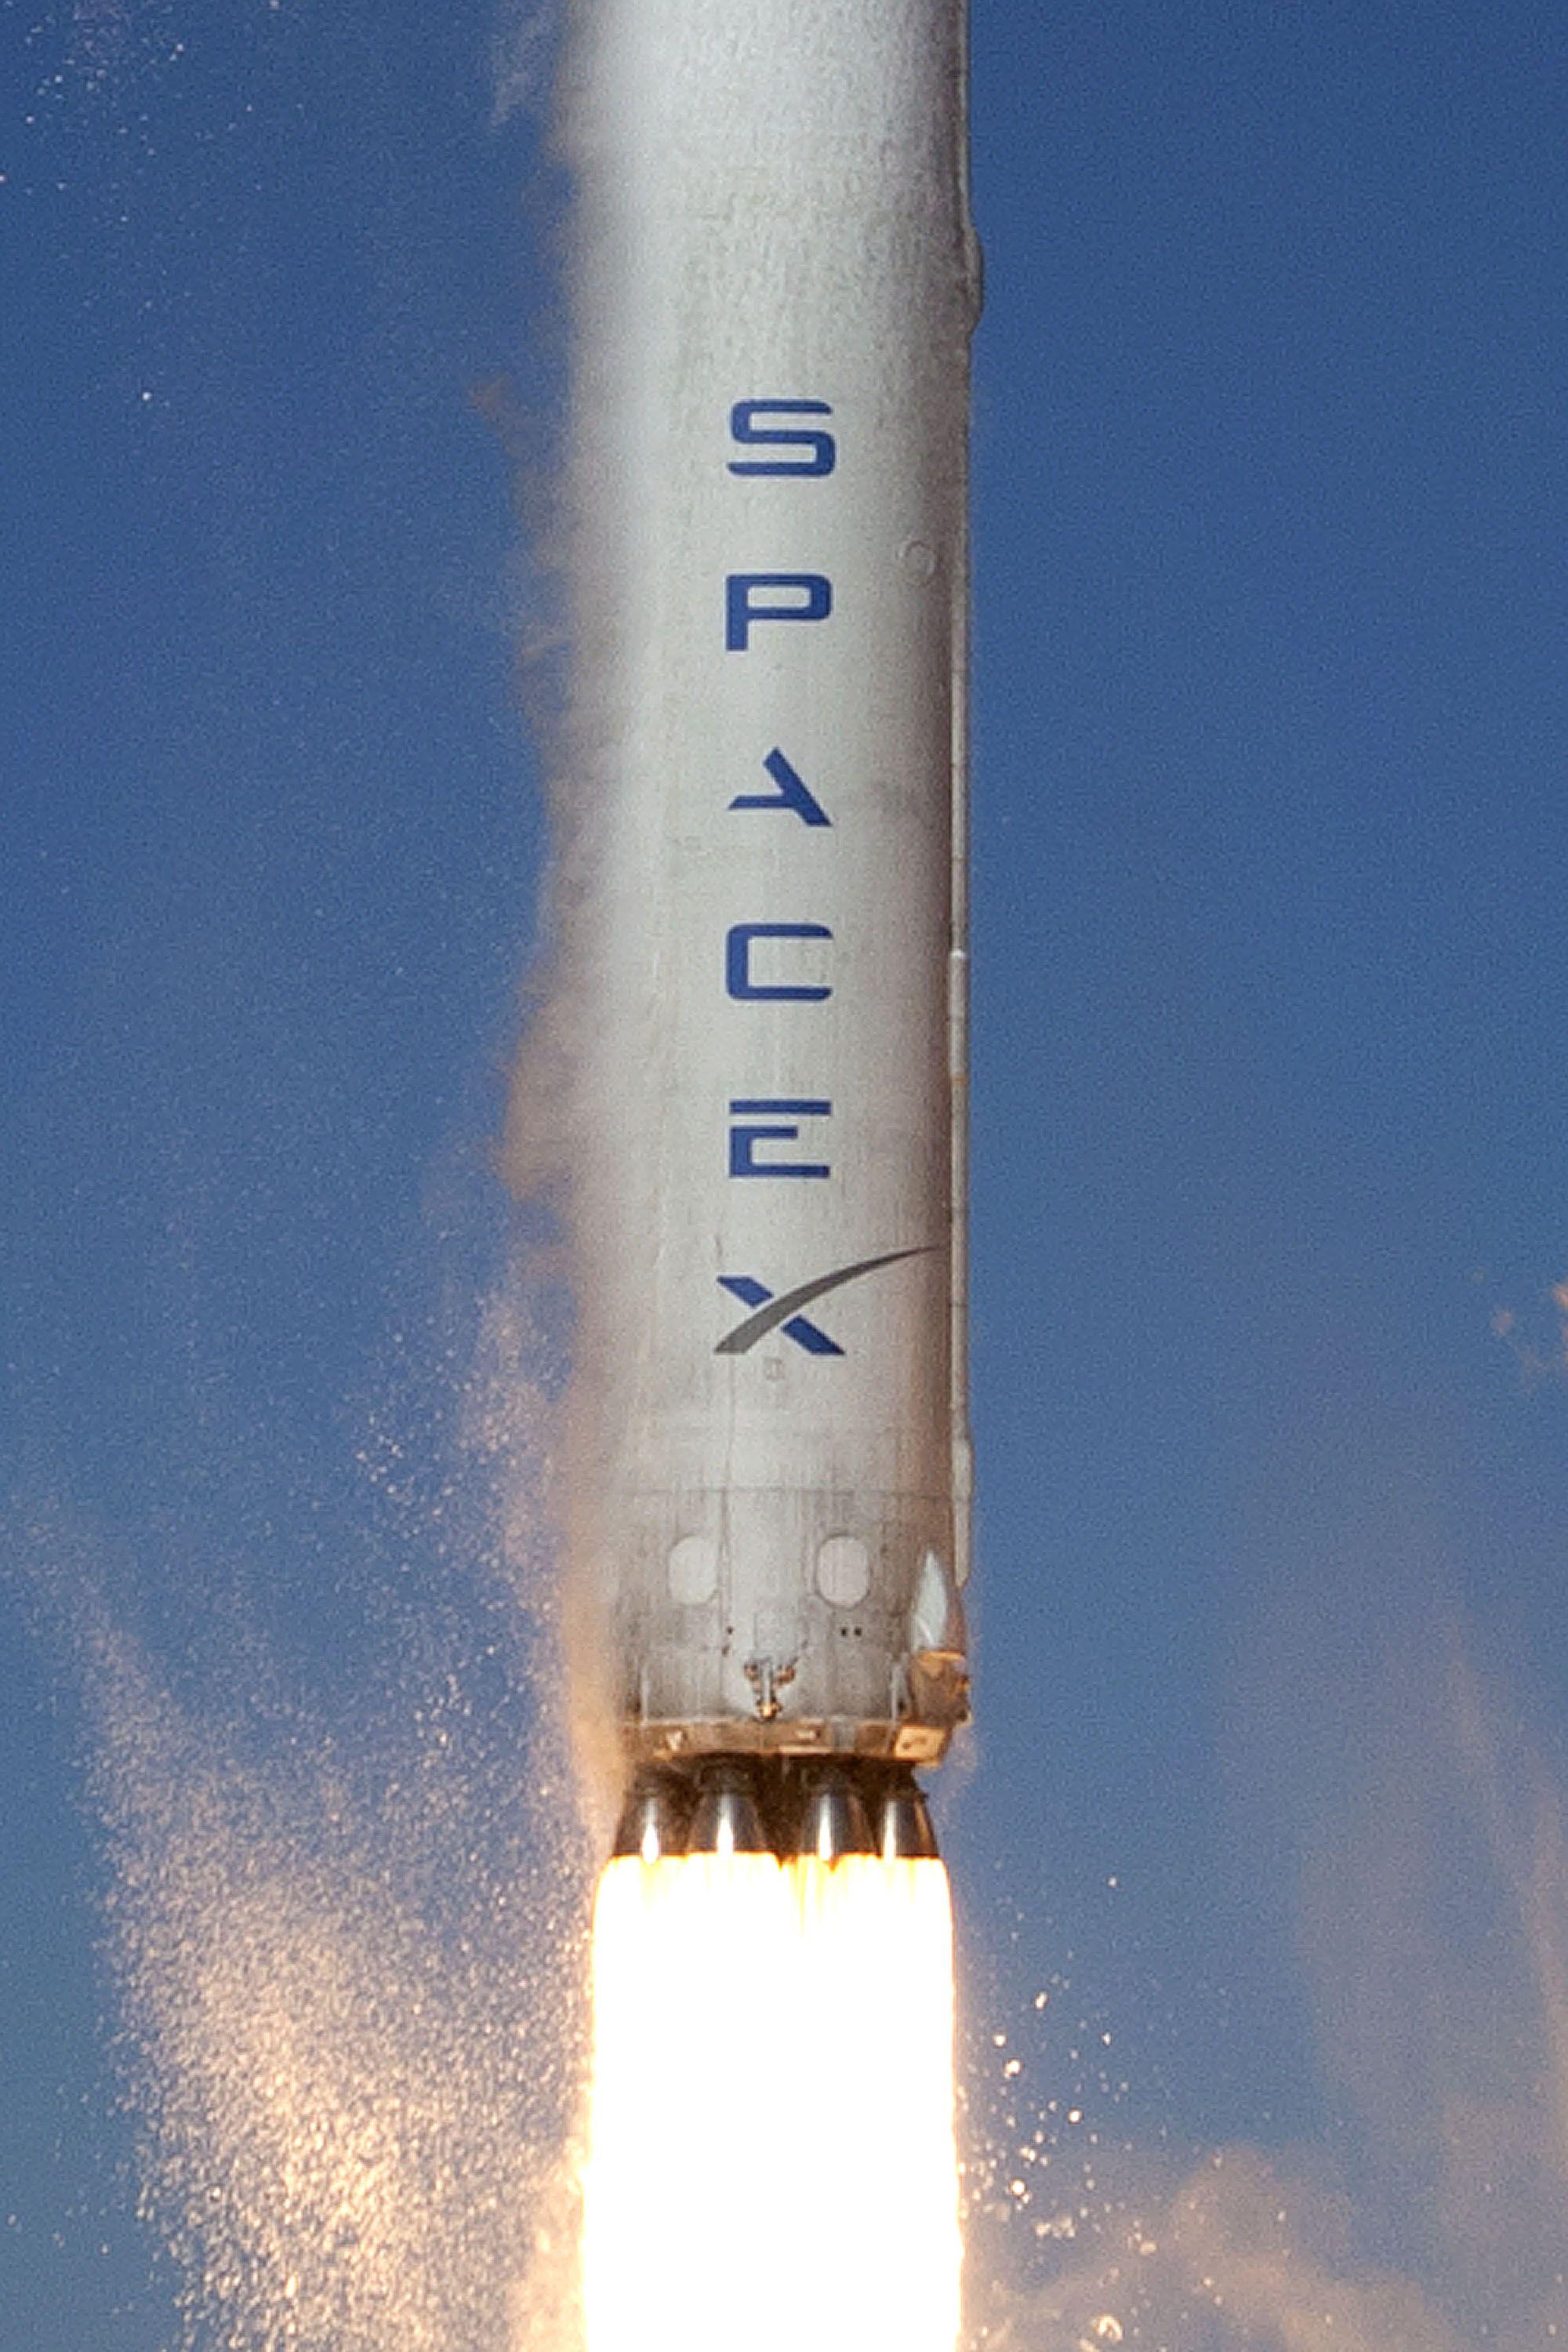 Following launch failure, SpaceX preparing to debut 'significantly